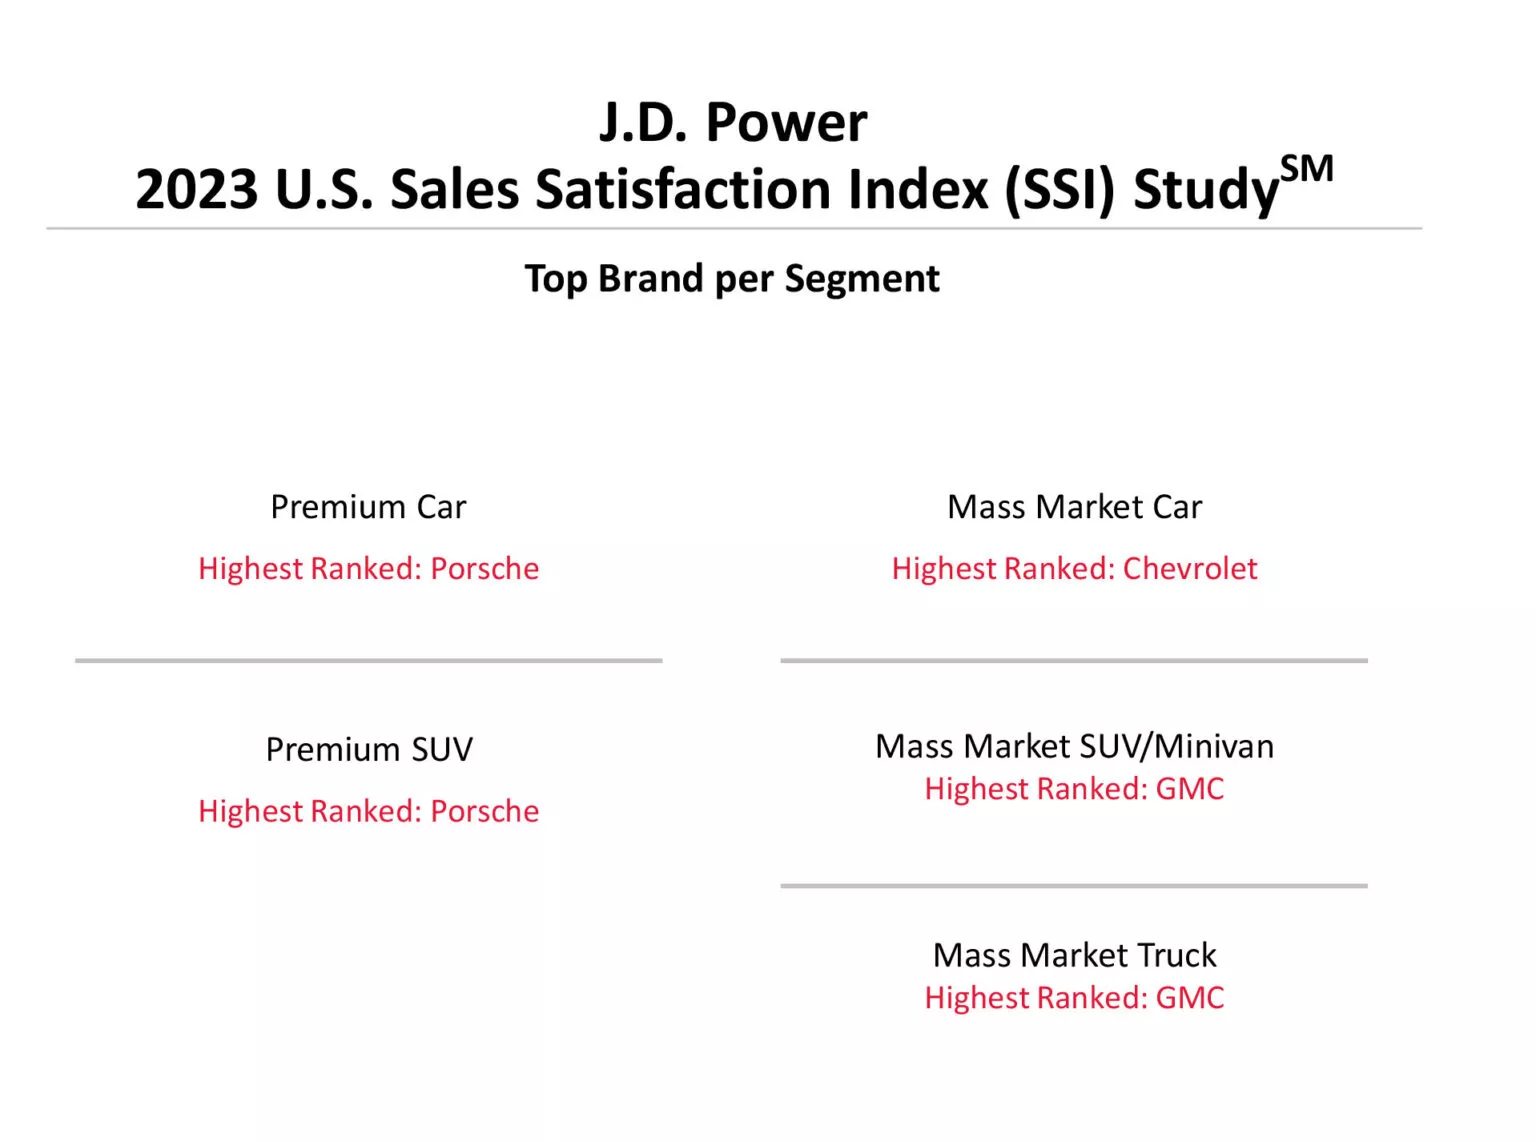 2023157 U.S. SSI 0 6 1536x1142 1 - Electric Vehicle Customers More Satisfied as Prices Stabilize, J.D. Power Study Reveals